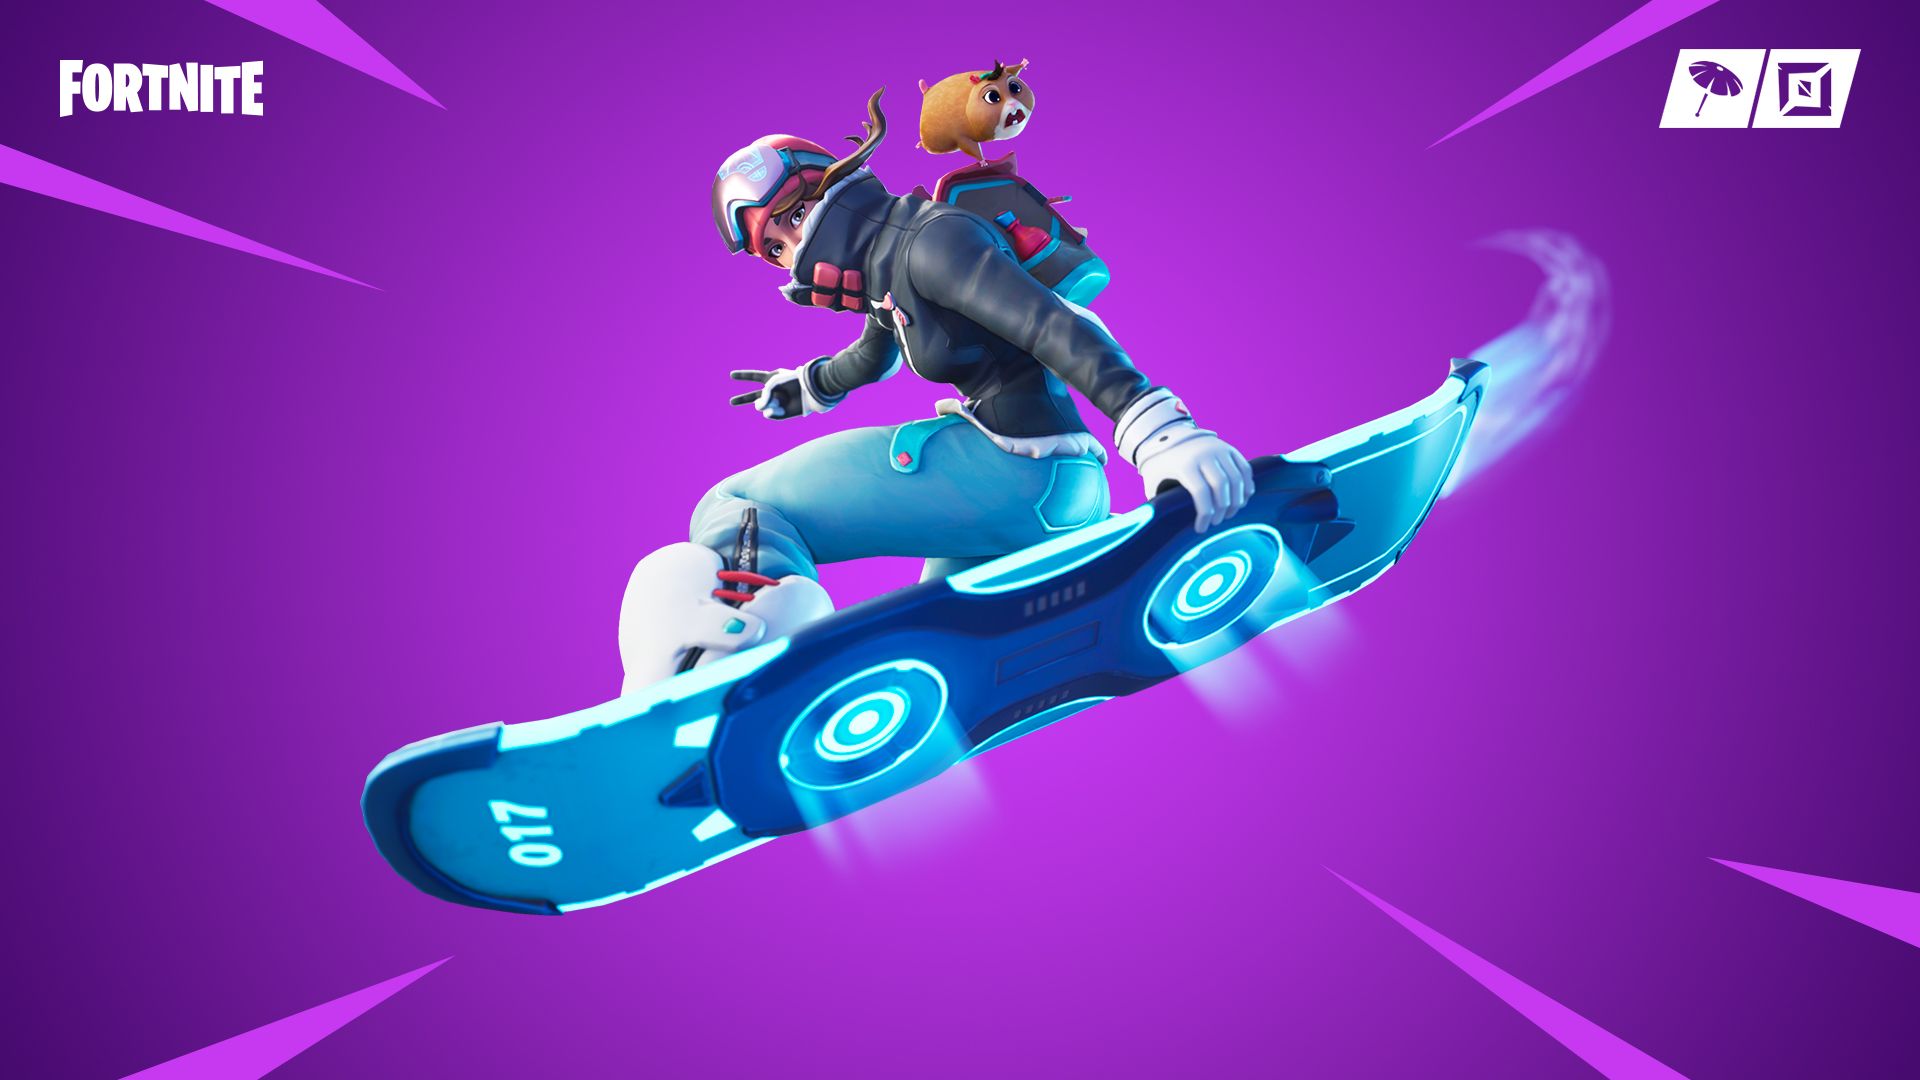 Fortnite gets a tricksy driftboard and new LTM to go with it